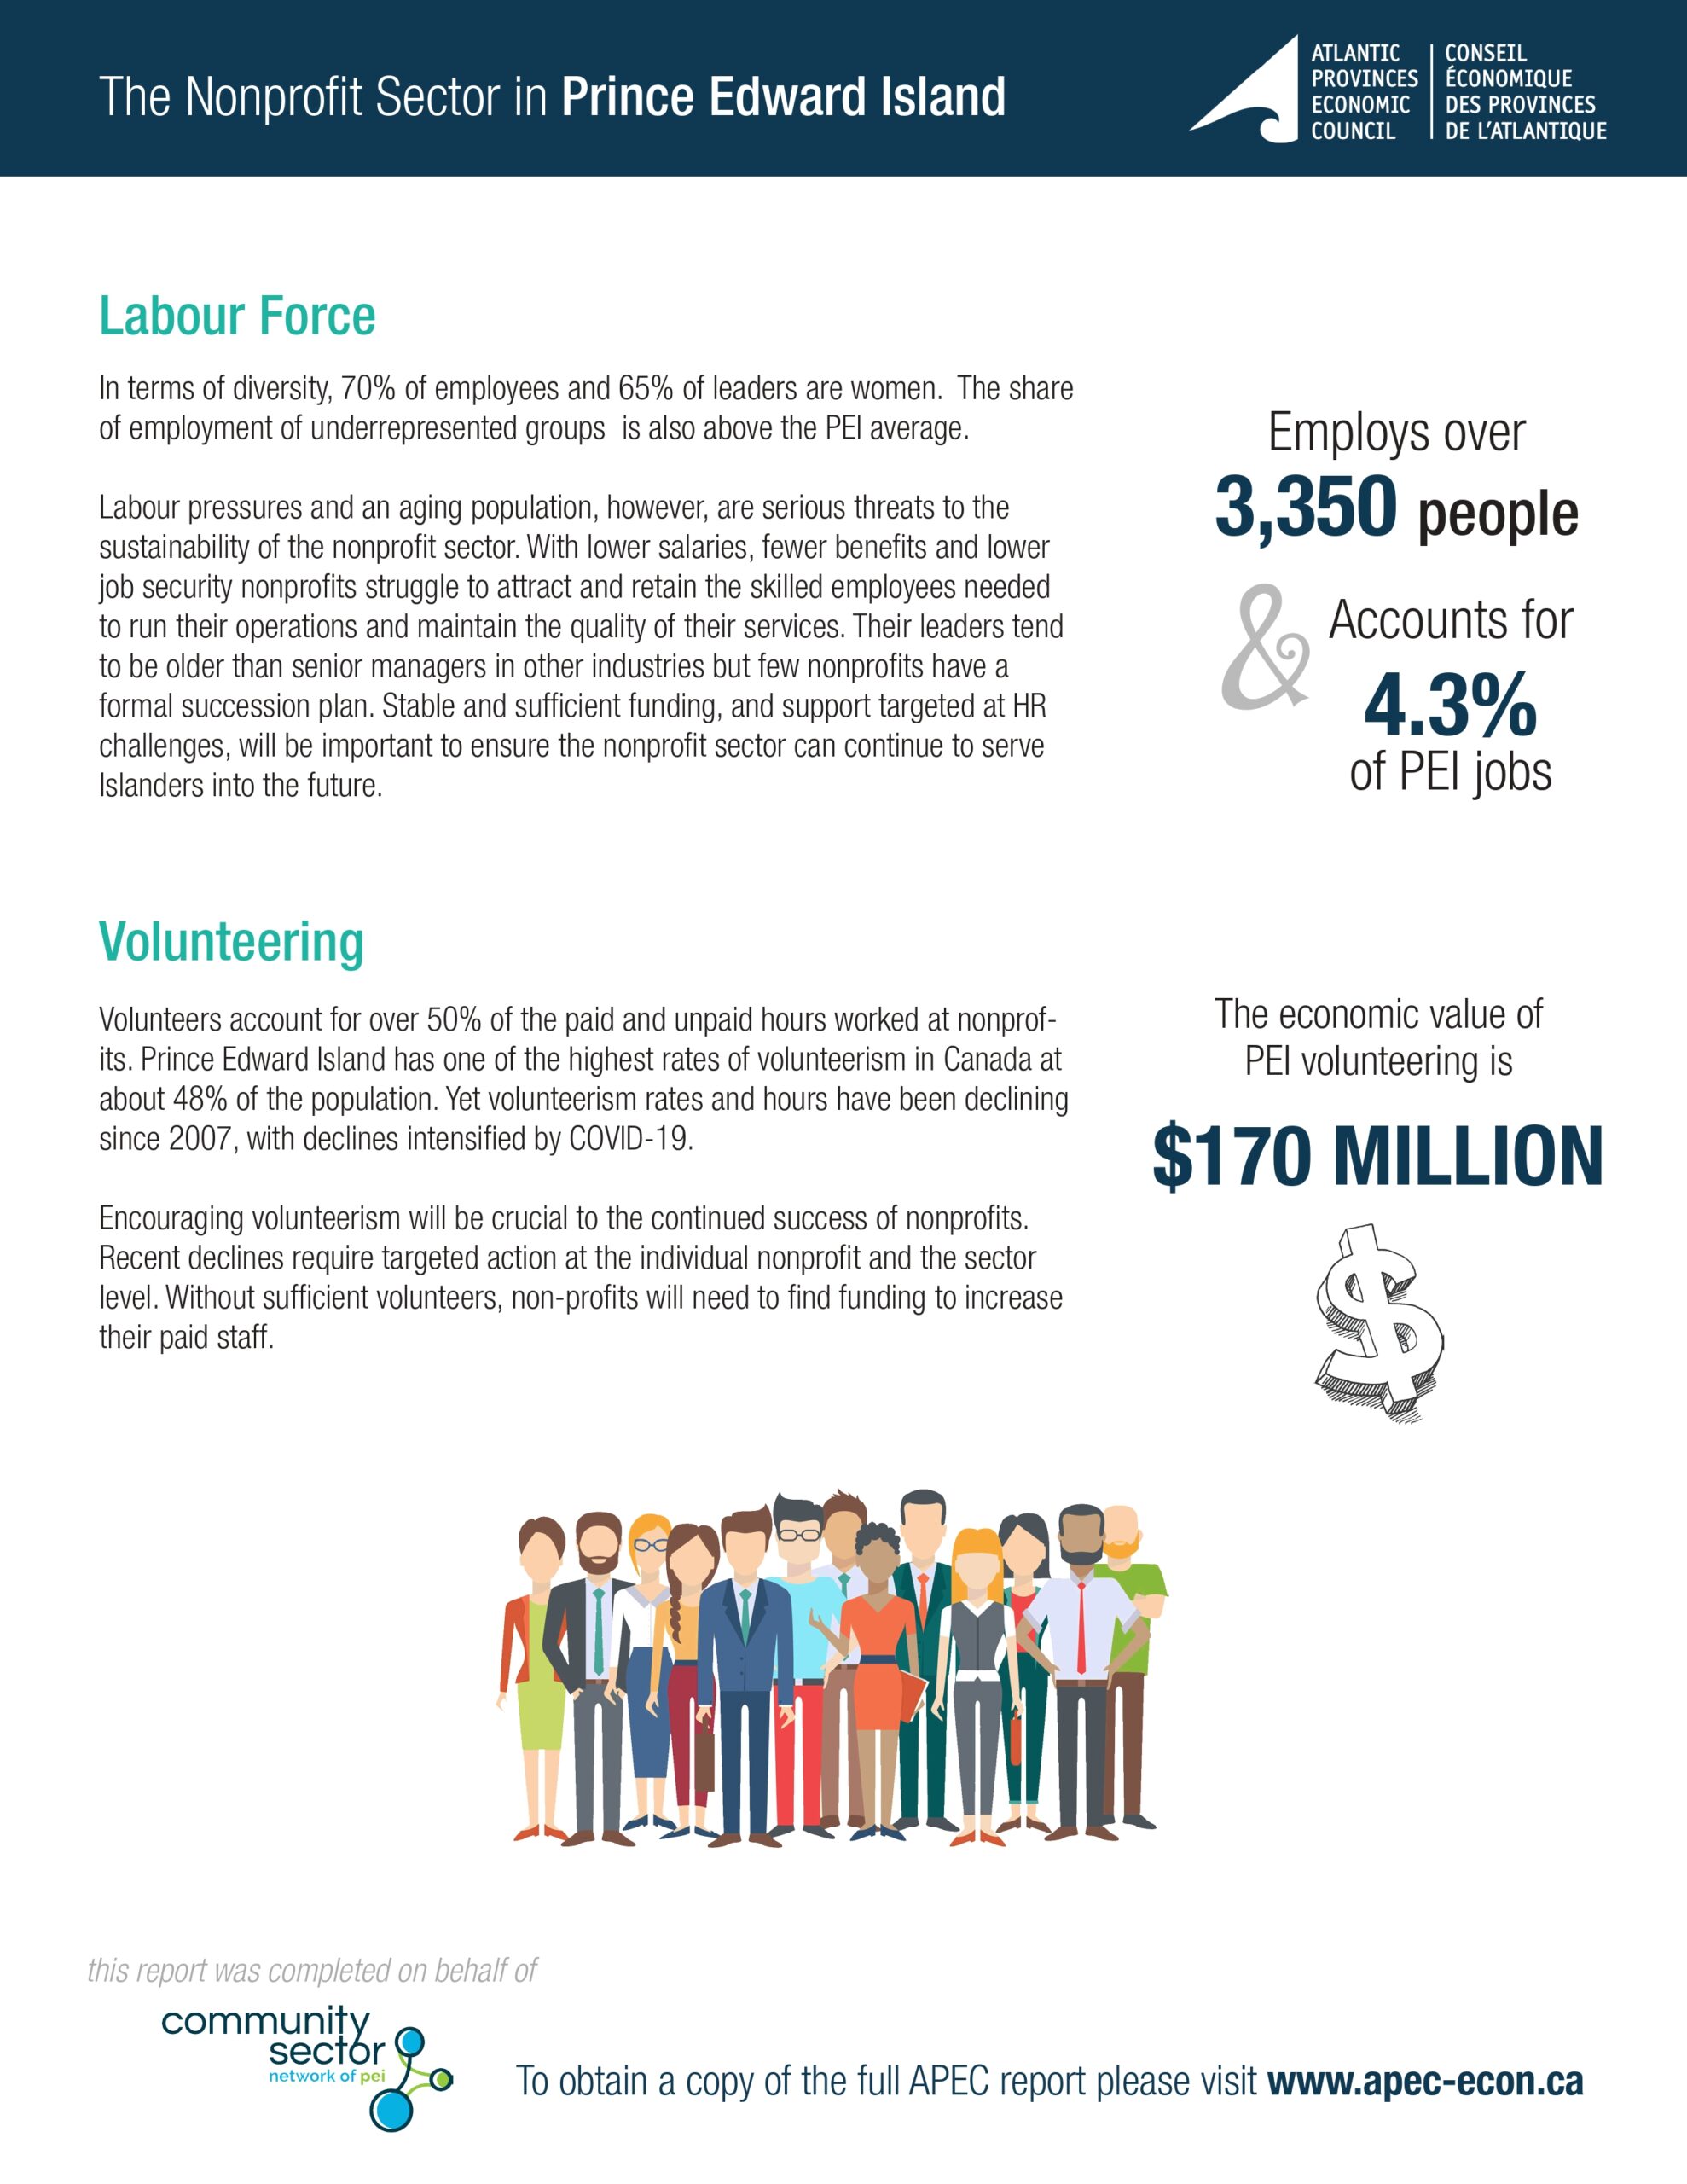 Labour Force  In terms of diversity, 70% of employees and 65% of leaders are women. The share of employment of underrepresented groups is also above the PEI average.  Labour pressures and an aging population, however, are serious threats to the sustainability of the nonprofit sector. With lower salaries, fewer benefits and lower job security nonprofits struggle to attract and retain the skilled employees needed to run their operations and maintain the quality of their services. Their leaders tend to be older than senior managers in other industries but few nonprofits have a  formal succession plan. Stable and sufficient funding, and support targeted at HR  challenges, will be important to ensure the nonprofit sector can continue to serve  Islanders into the future.  Volunteering  Volunteers account for over 50% of the paid and unpaid hours worked at nonprofits. Prince Edward Island has one of the highest rates of volunteerism in Canada at about 48% of the population. Yet volunteerism rates and hours have been declining since 2007, with declines intensified by COVID-19.   Encouraging volunteerism will be crucial to the continued success of nonprofits.  Recent declines require targeted action at the individual nonprofit and the sector level. Without sufficient volunteers, non-profits will need to find funding to increase their paid staff. 